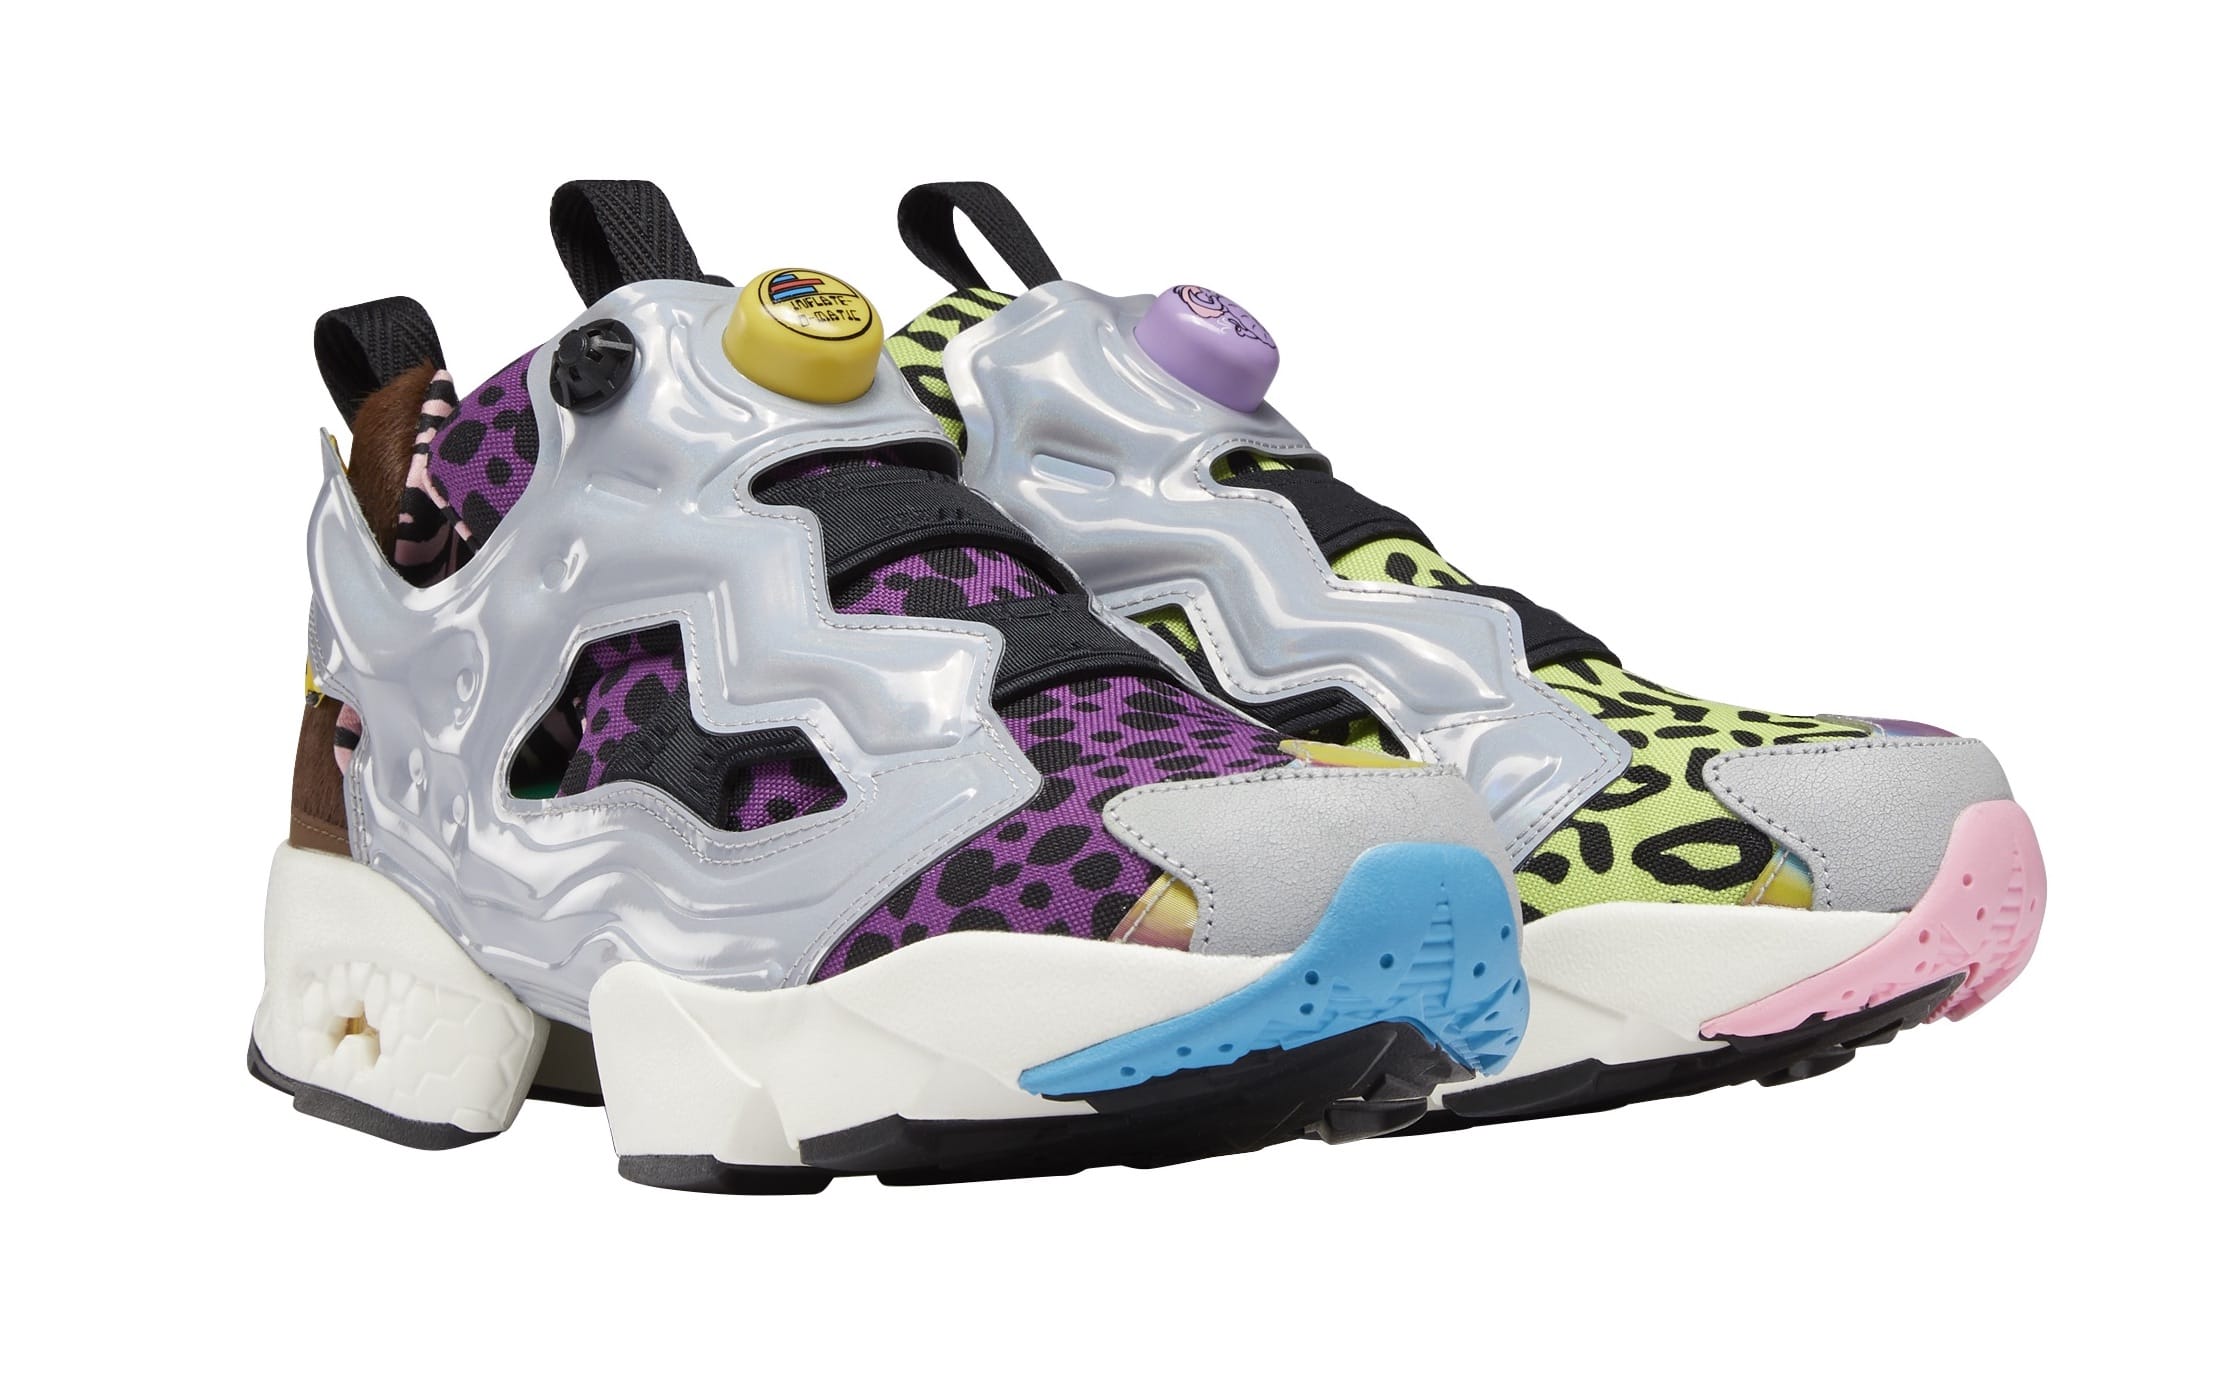 Reebok x The Jetsons & The Flintstones shoes and clothing collection. Instapump Fury 94 Shoes. Photo courtesy of Reebok.